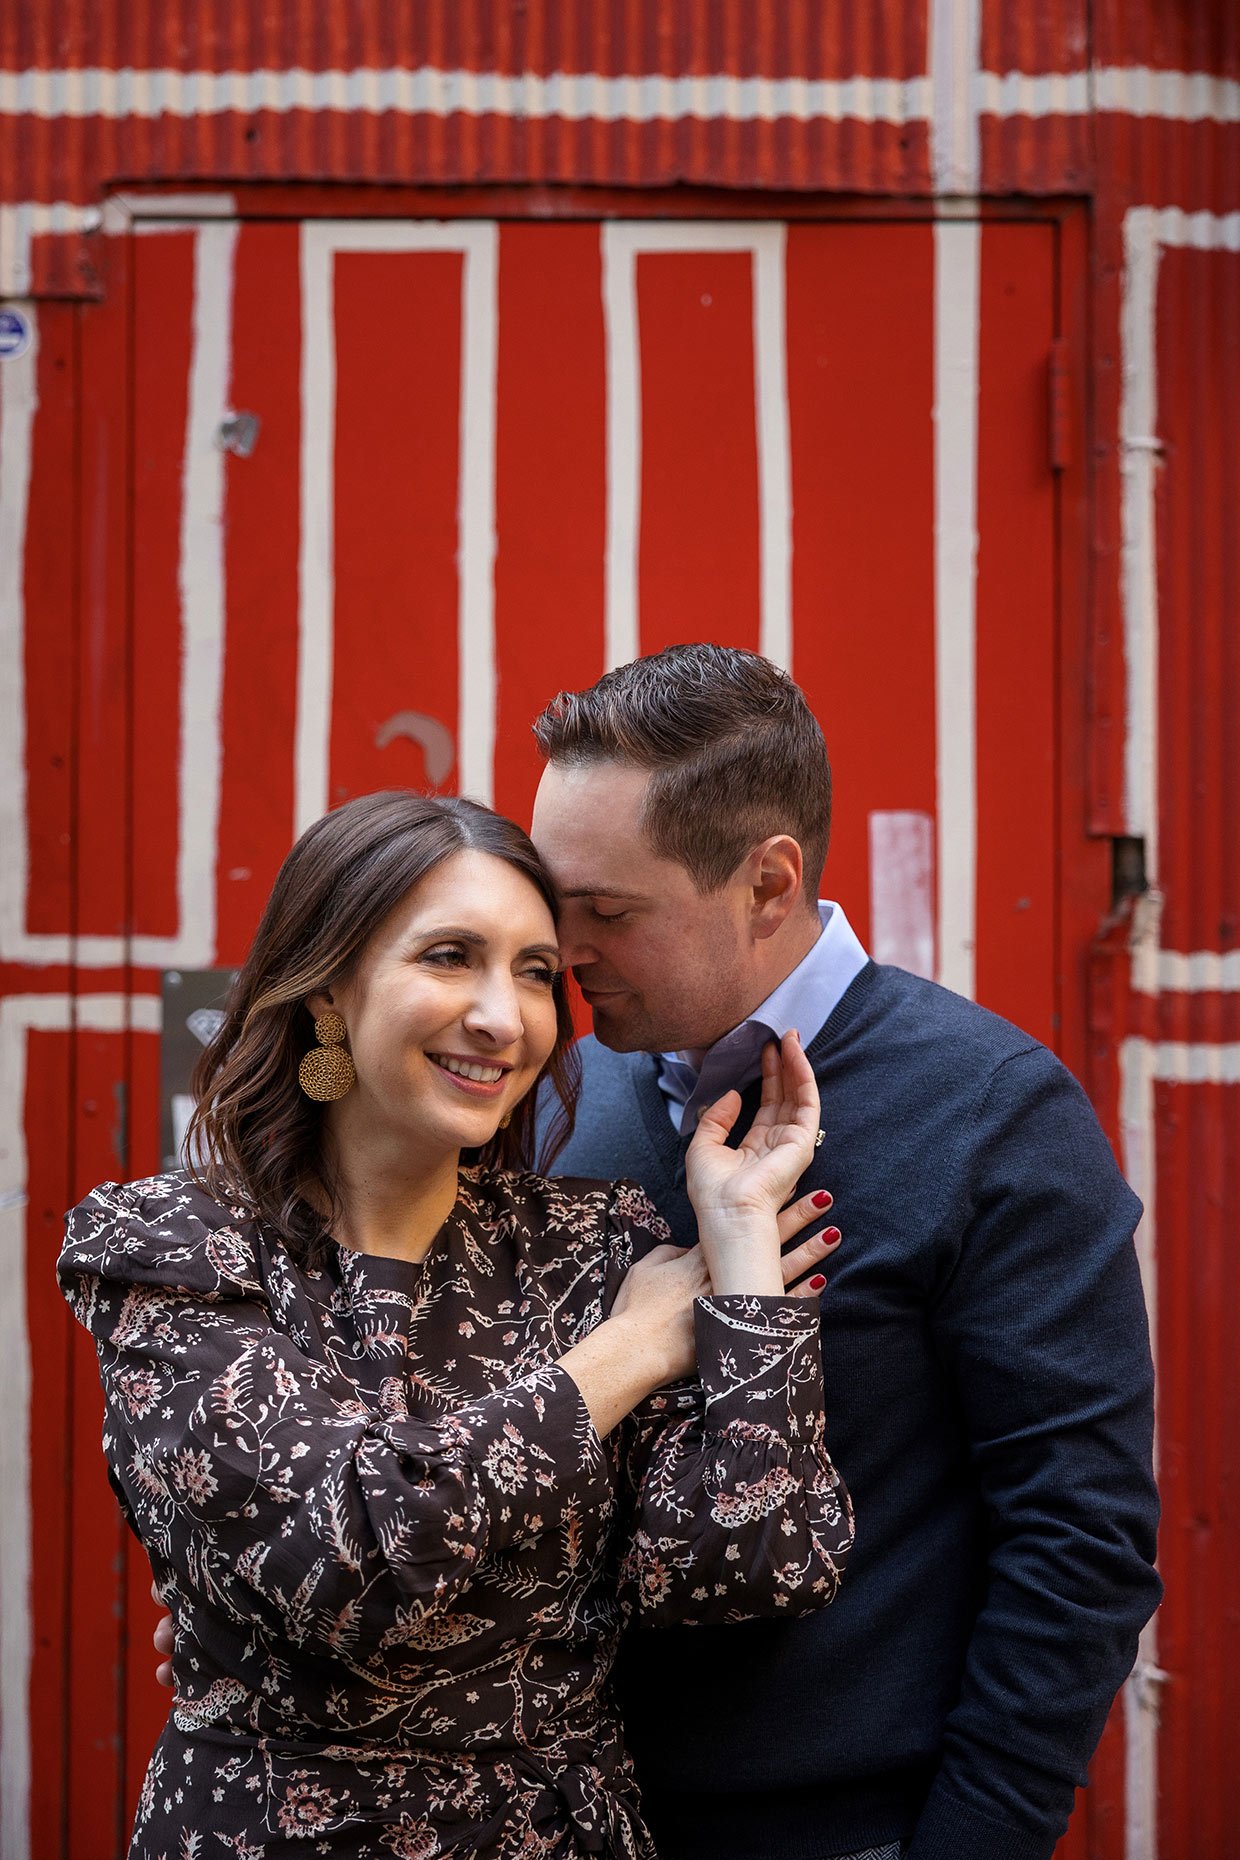 Engagement photo at Freeman's Alley in front of the red door